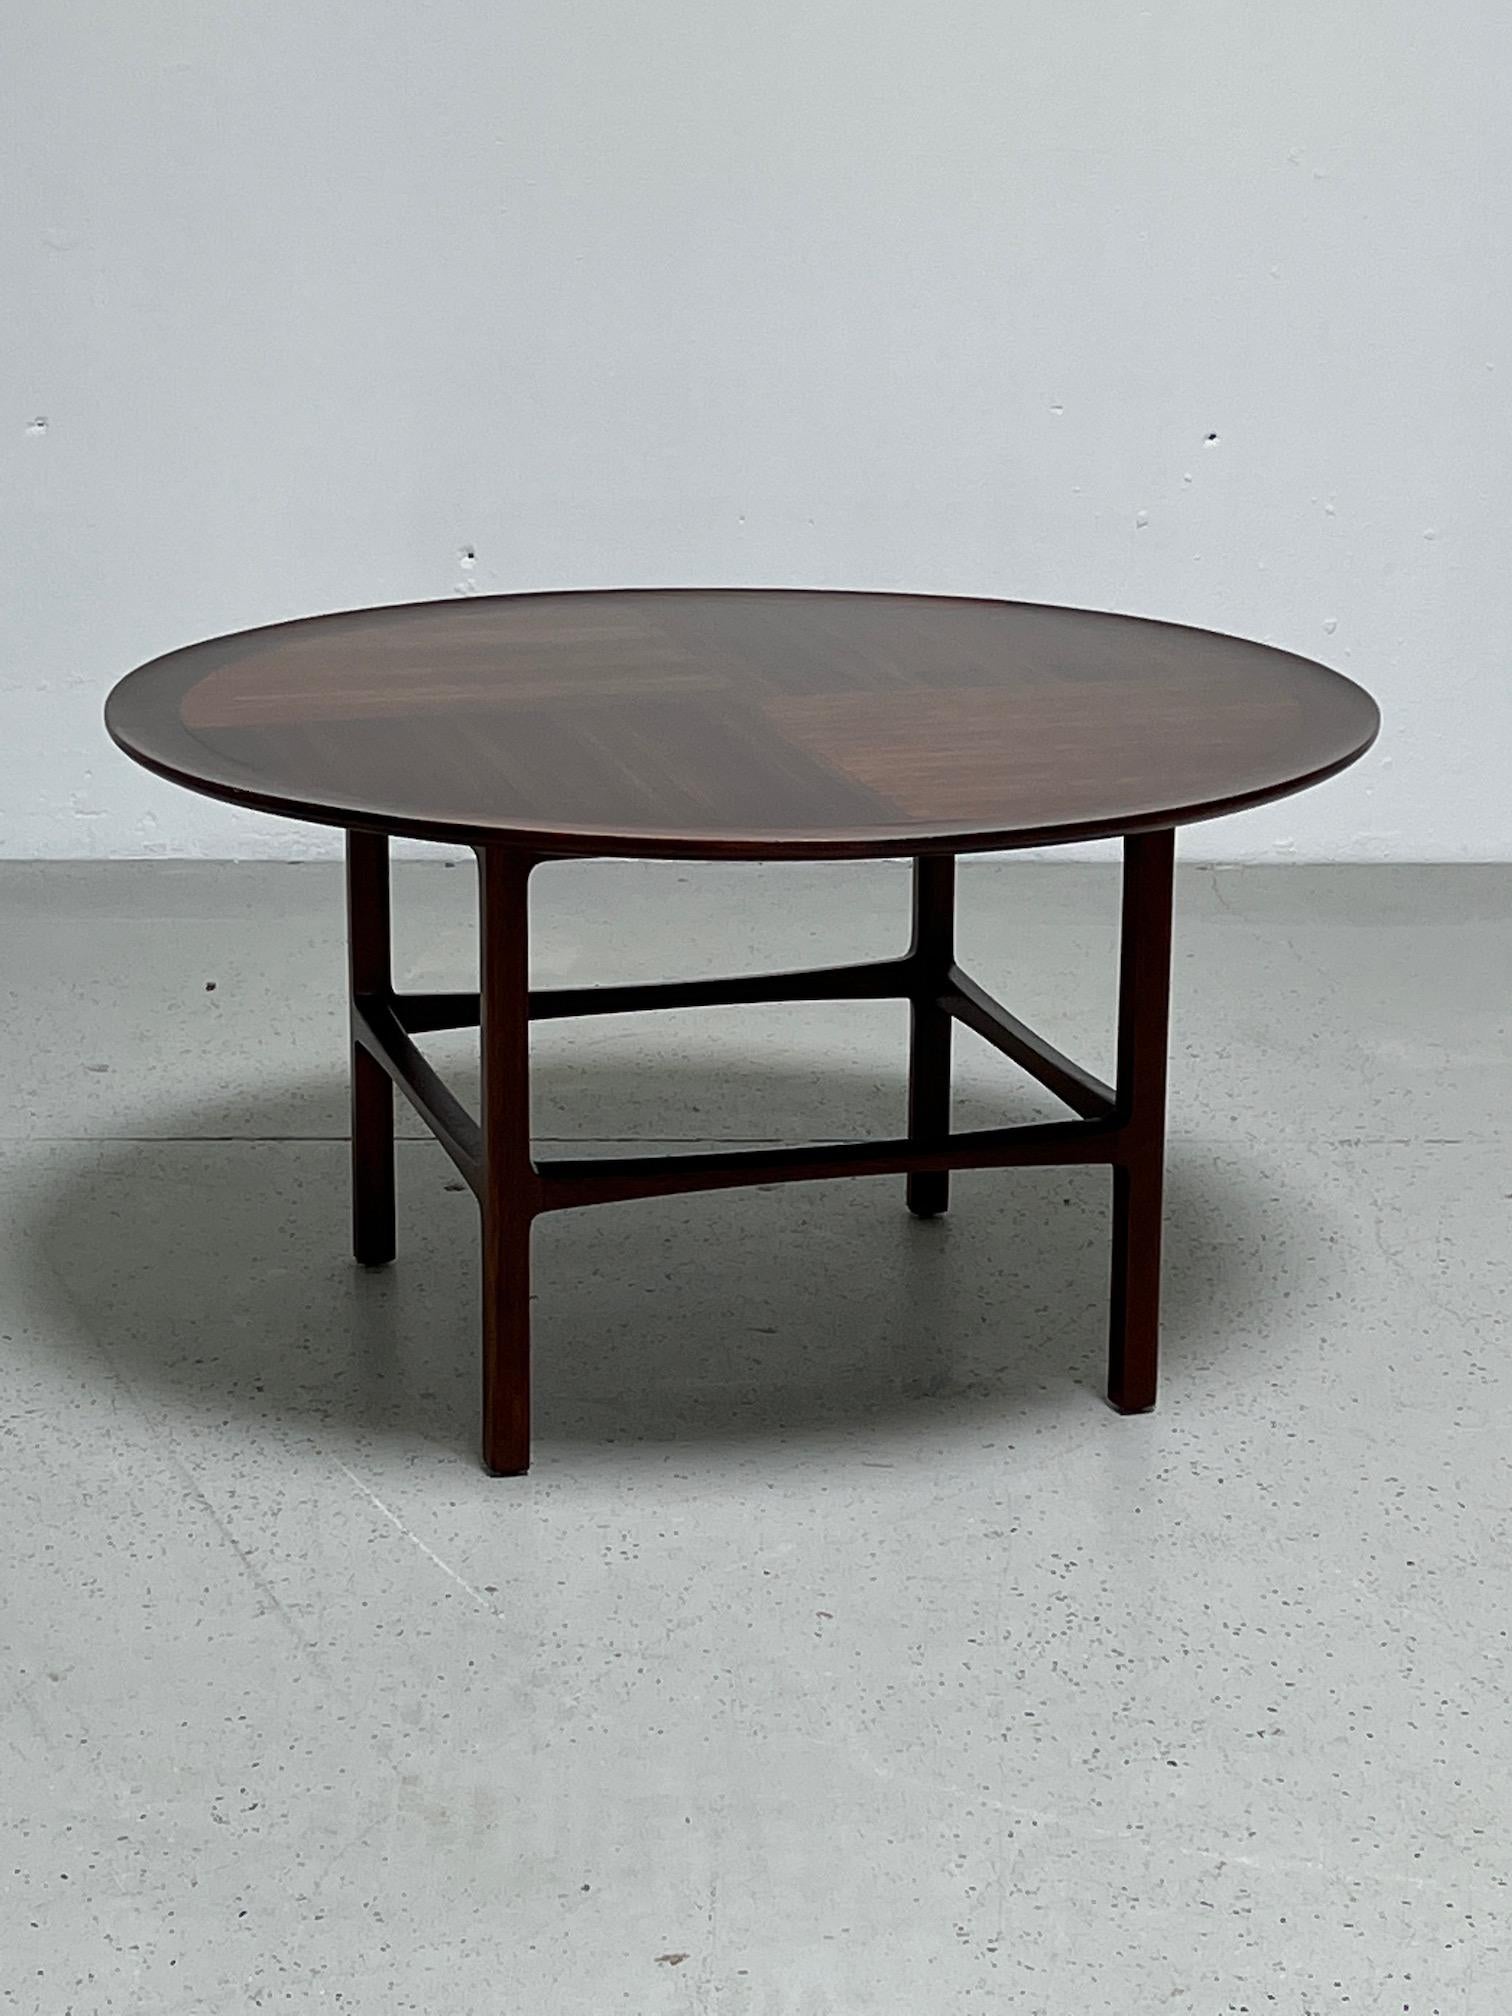 A tall cocktail table designed by Edward Wormley for Dunbar.